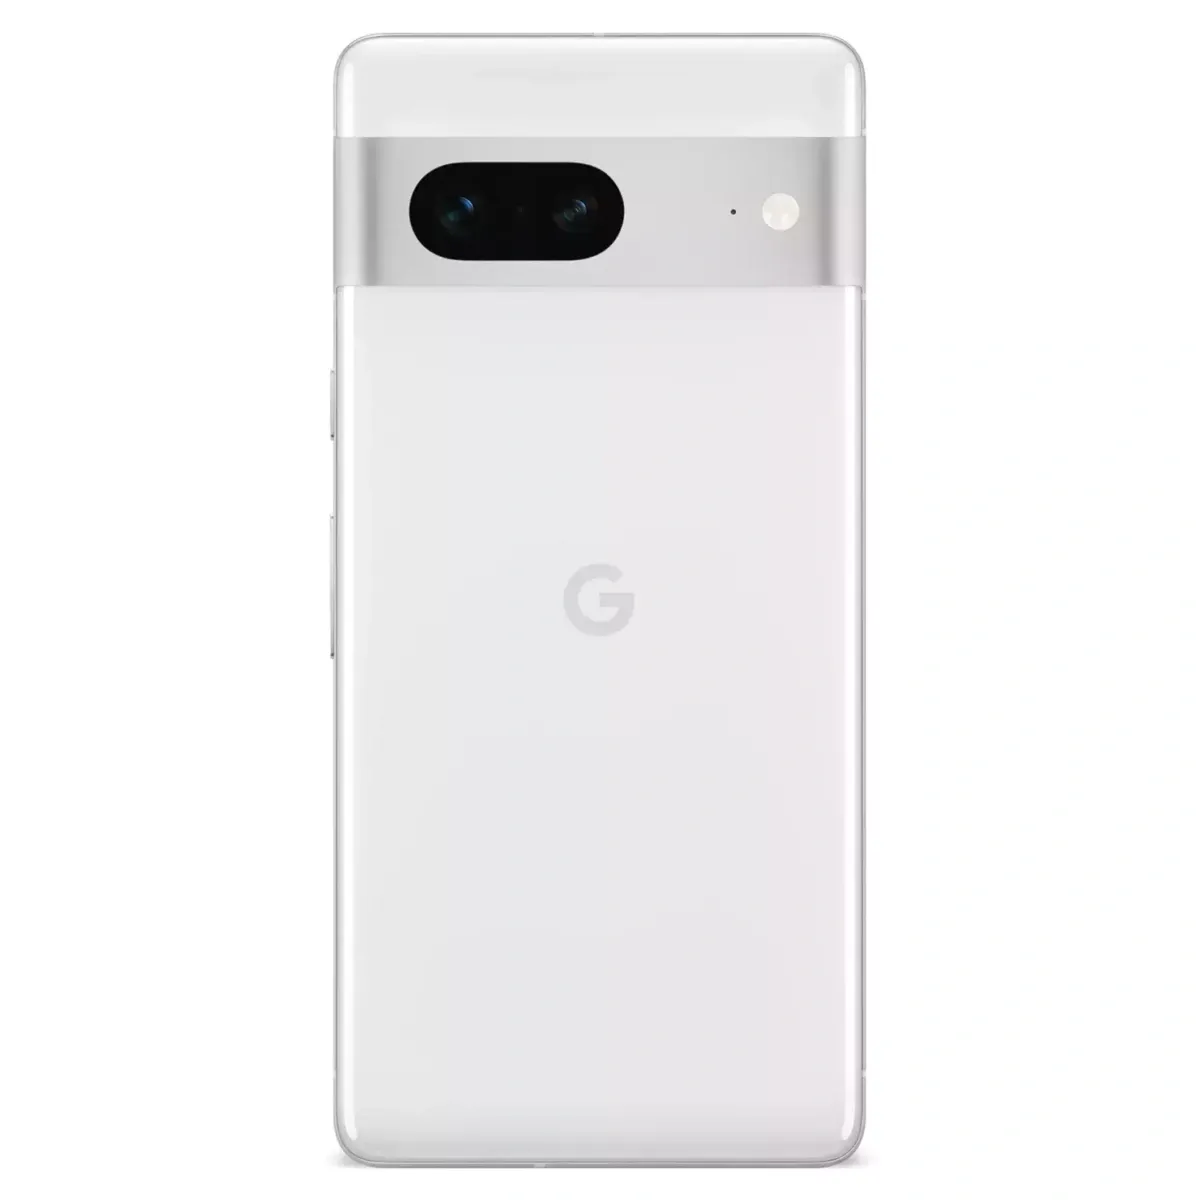 The Google Pixel 7 is a refinement of the already excellent Pixel 6, making for a very polished flagship phone without exorbitant prices.